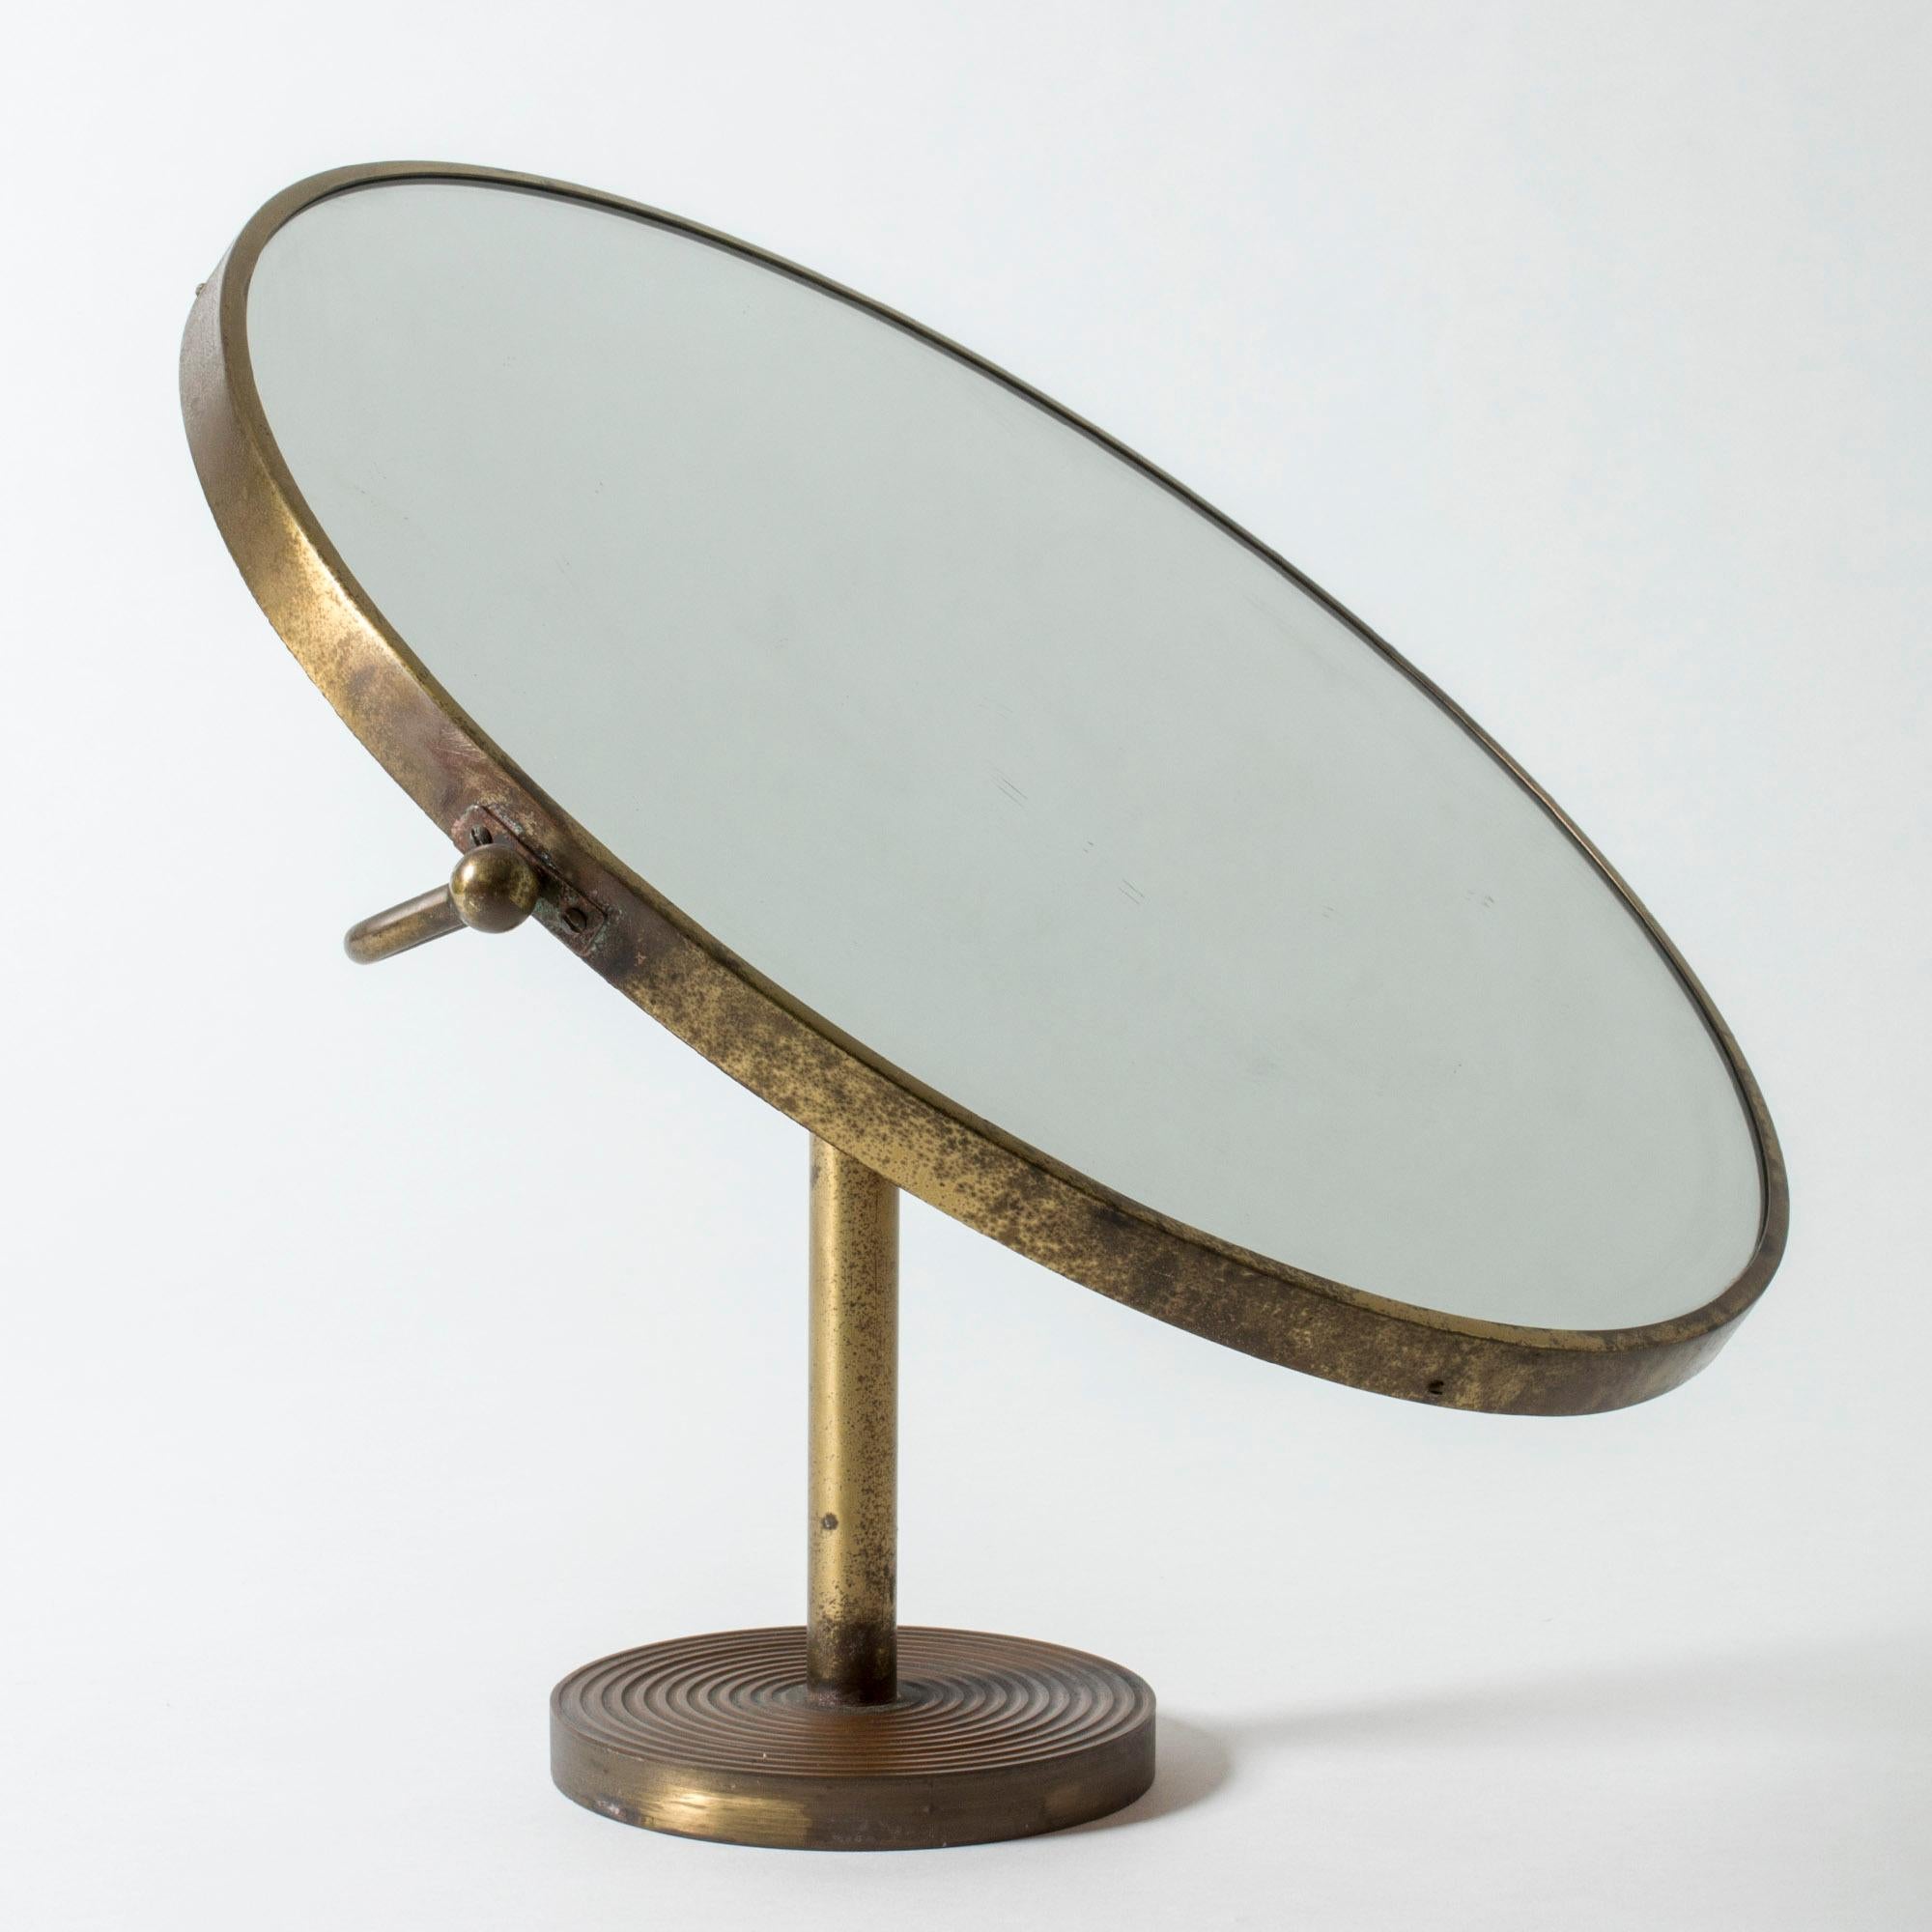 Oversized, round brass table mirror by Josef Frank with heavy brass patina. Clean, elegant lines. Beautiful embossed pattern of stripes on the base of the mirror, wooden back.